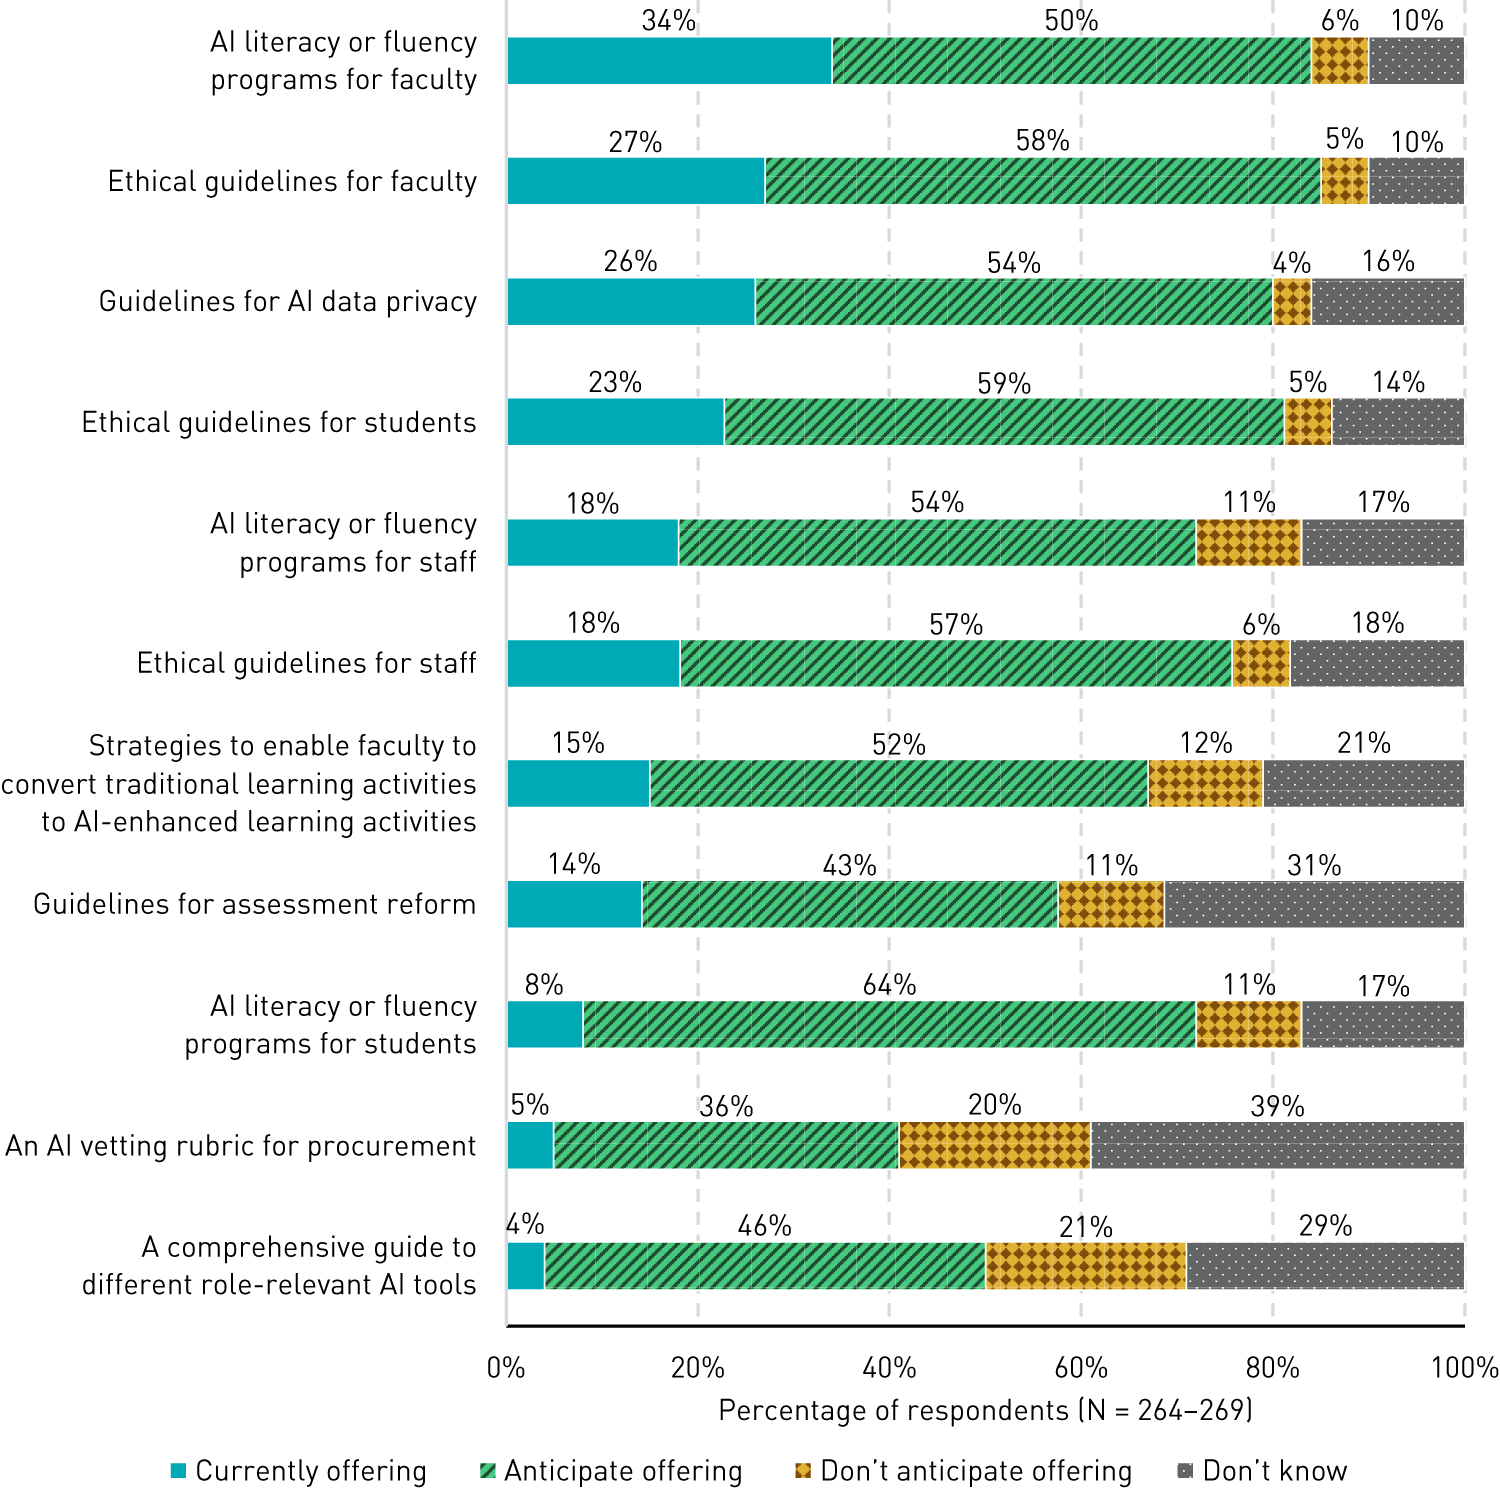 Stacked bar chart showing whether institutions offer or plan to offer several AI resources: AI literacy or fluency programs for faculty (currently offering, 34%; anticipate offering, 50%; don’t anticipate offering, 6%; don’t know, 10%), Ethical guidelines for faculty (27%, 58%, 5%, 10%), Guidelines for AI data privacy (26%, 54%, 4%, 16%), Ethical guidelines for students (23%, 59%, 5%, 14%), AI literacy or fluency programs for staff (18%, 54%, 11%, 17%), Ethical guidelines for staff (18%, 57%, 6%, 18%), Strategies to enable faculty to convert traditional learning activities to AI-enhanced learning activities (15%, 52%, 12%, 21%), Guidelines for assessment reform  (14%, 43%, 11%, 31%), AI literacy or fluency programs for students (8%, 64%, 11%, 17%), An AI vetting rubric for procurement (5%, 36%, 20%, 39%), A comprehensive guide to different role-relevant AI tools (4%, 46%, 21%, 29%).